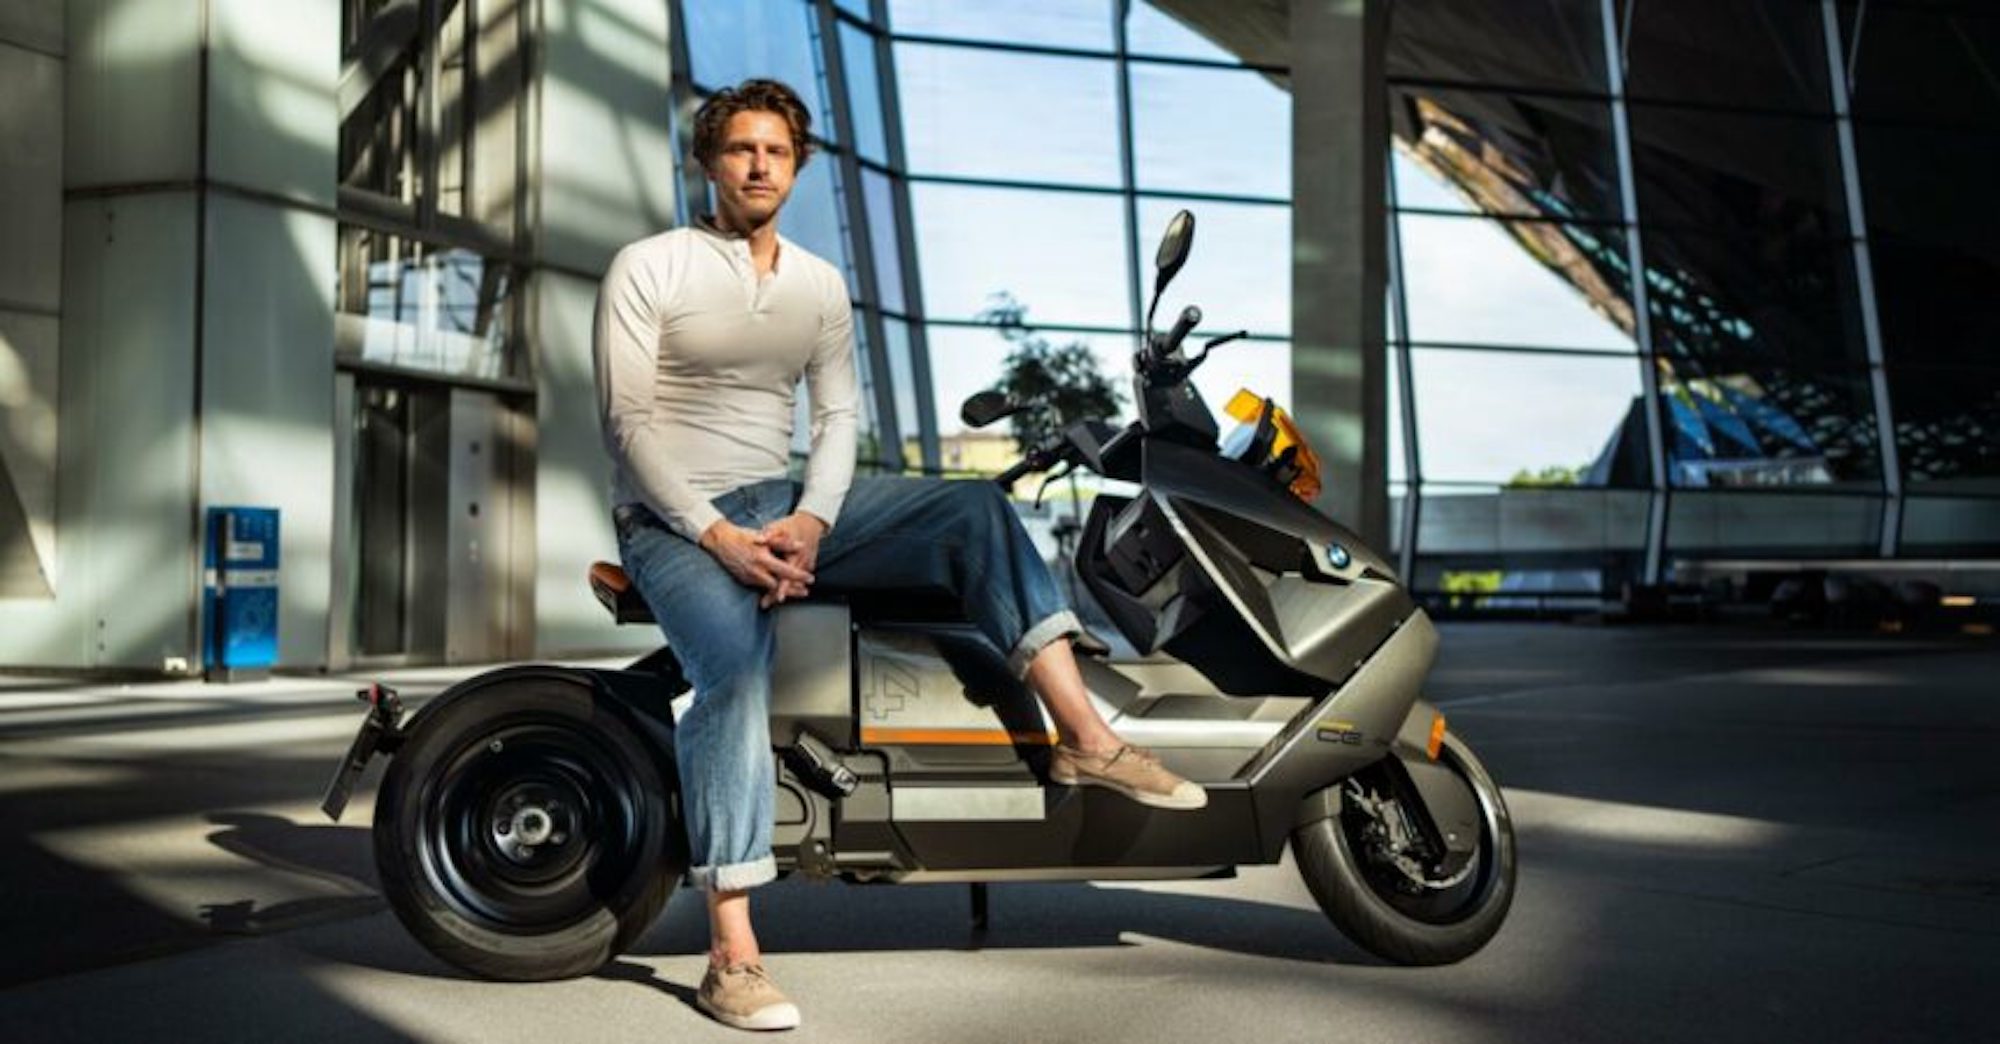 BMW's new Design Director, Alexander Buchan, sitting on one of his designs, the CE 04. Media sourced from BMW.